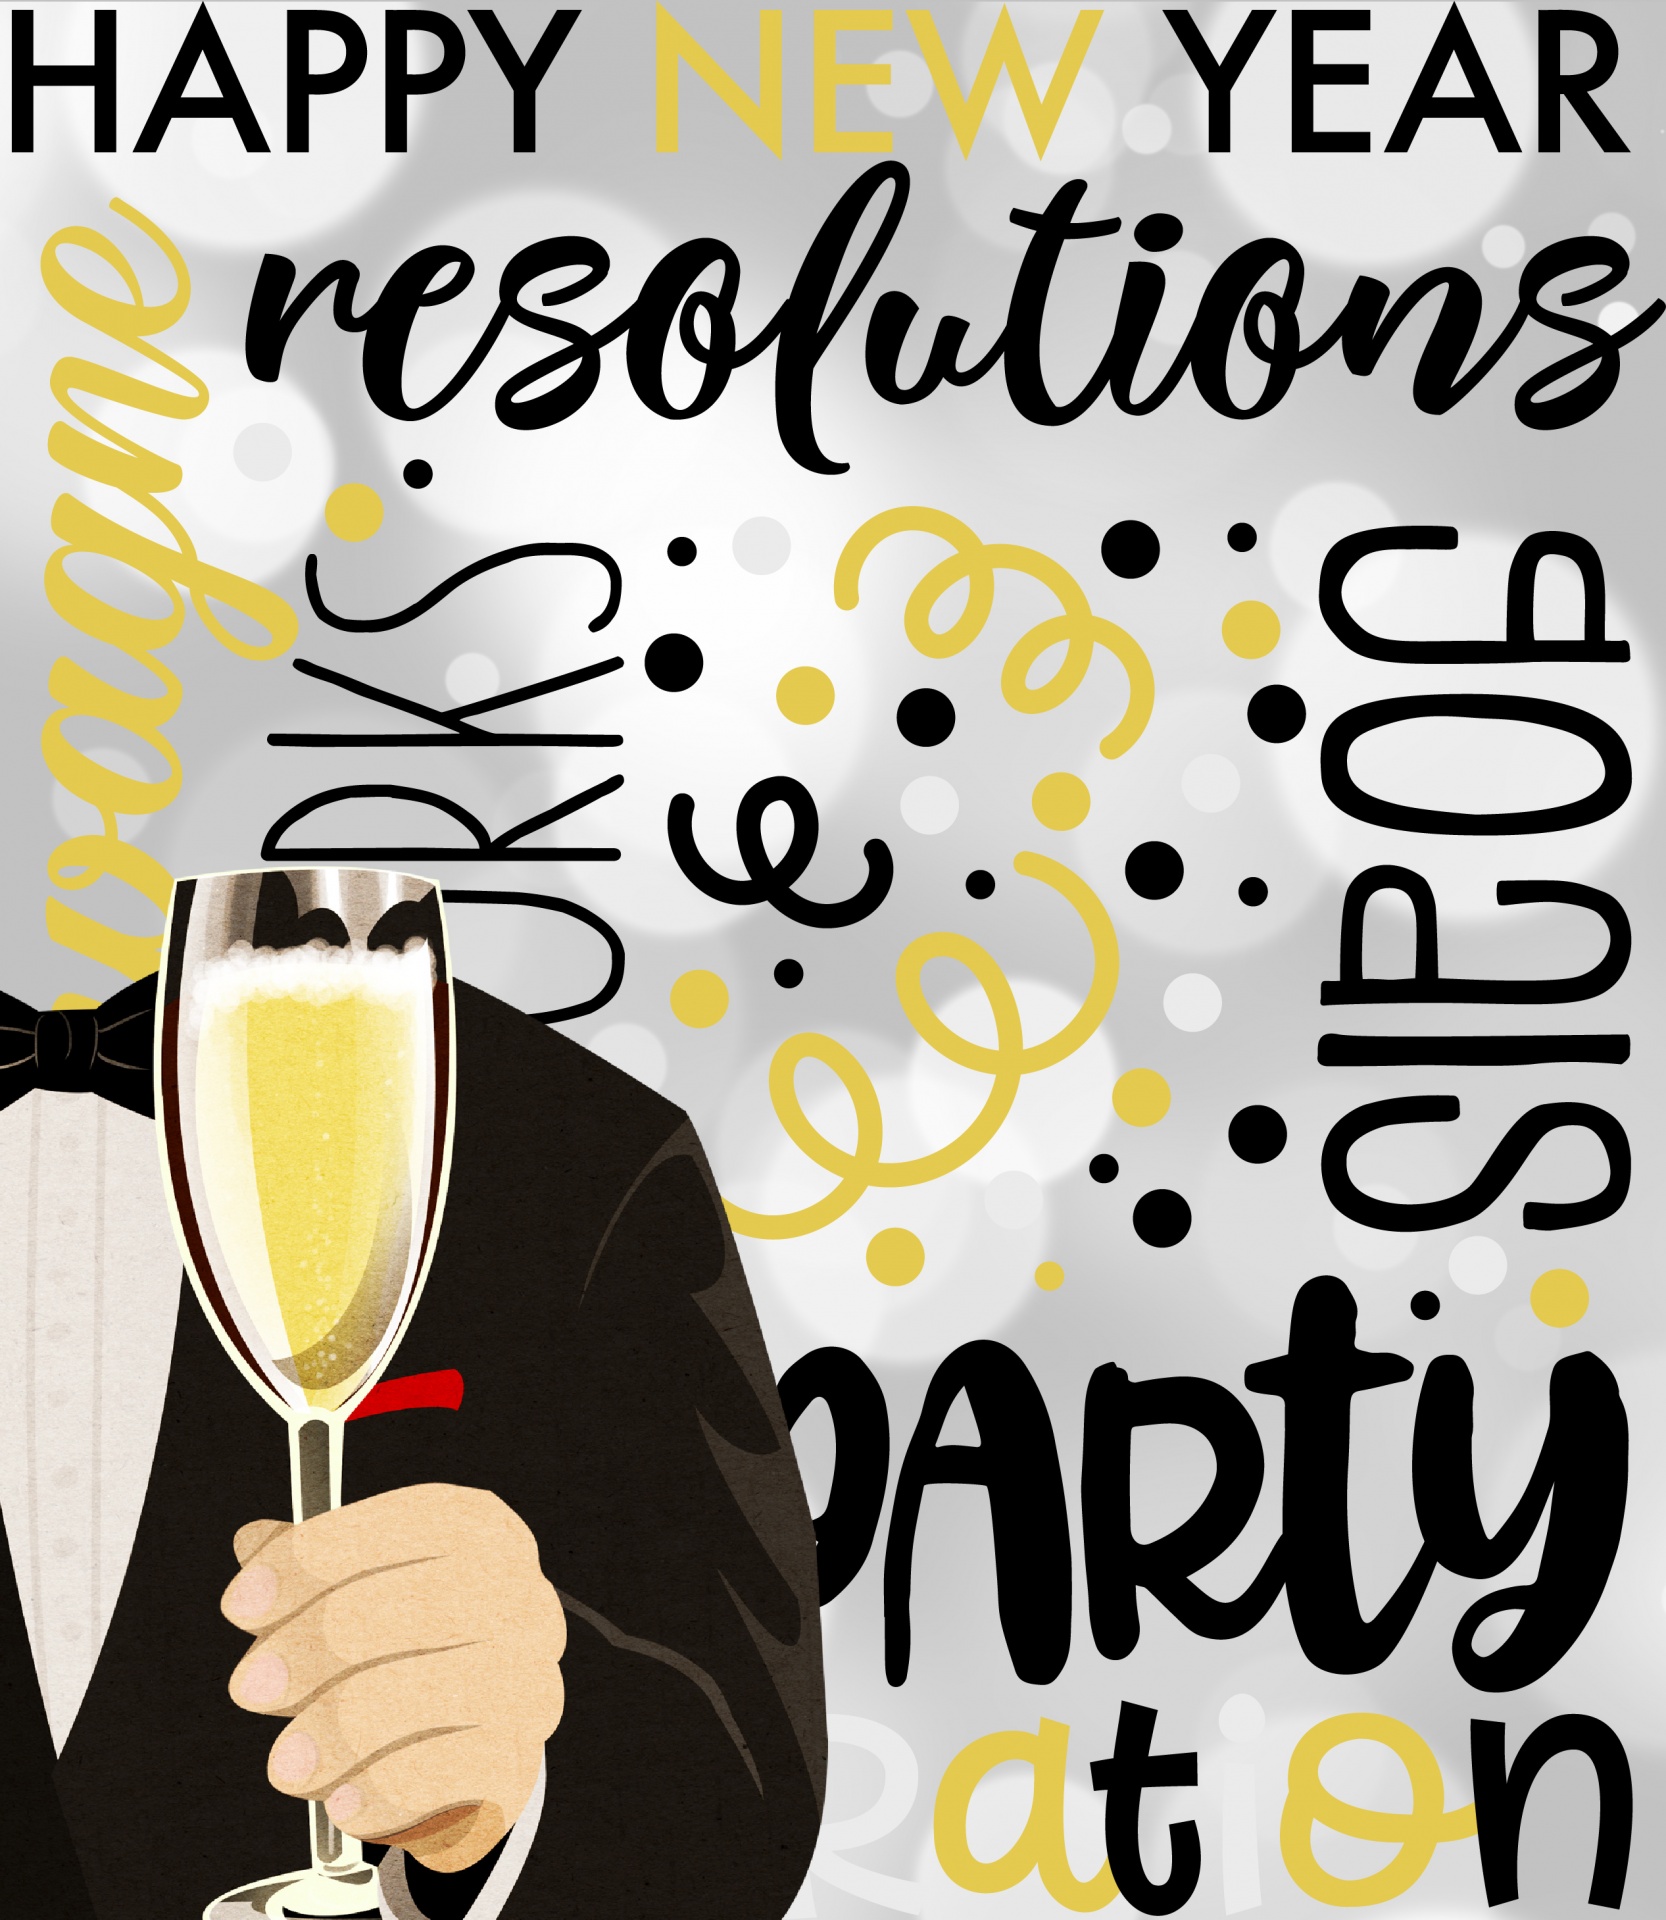 headless man in a tux holding out a glass of champaign on a background of words about New Years